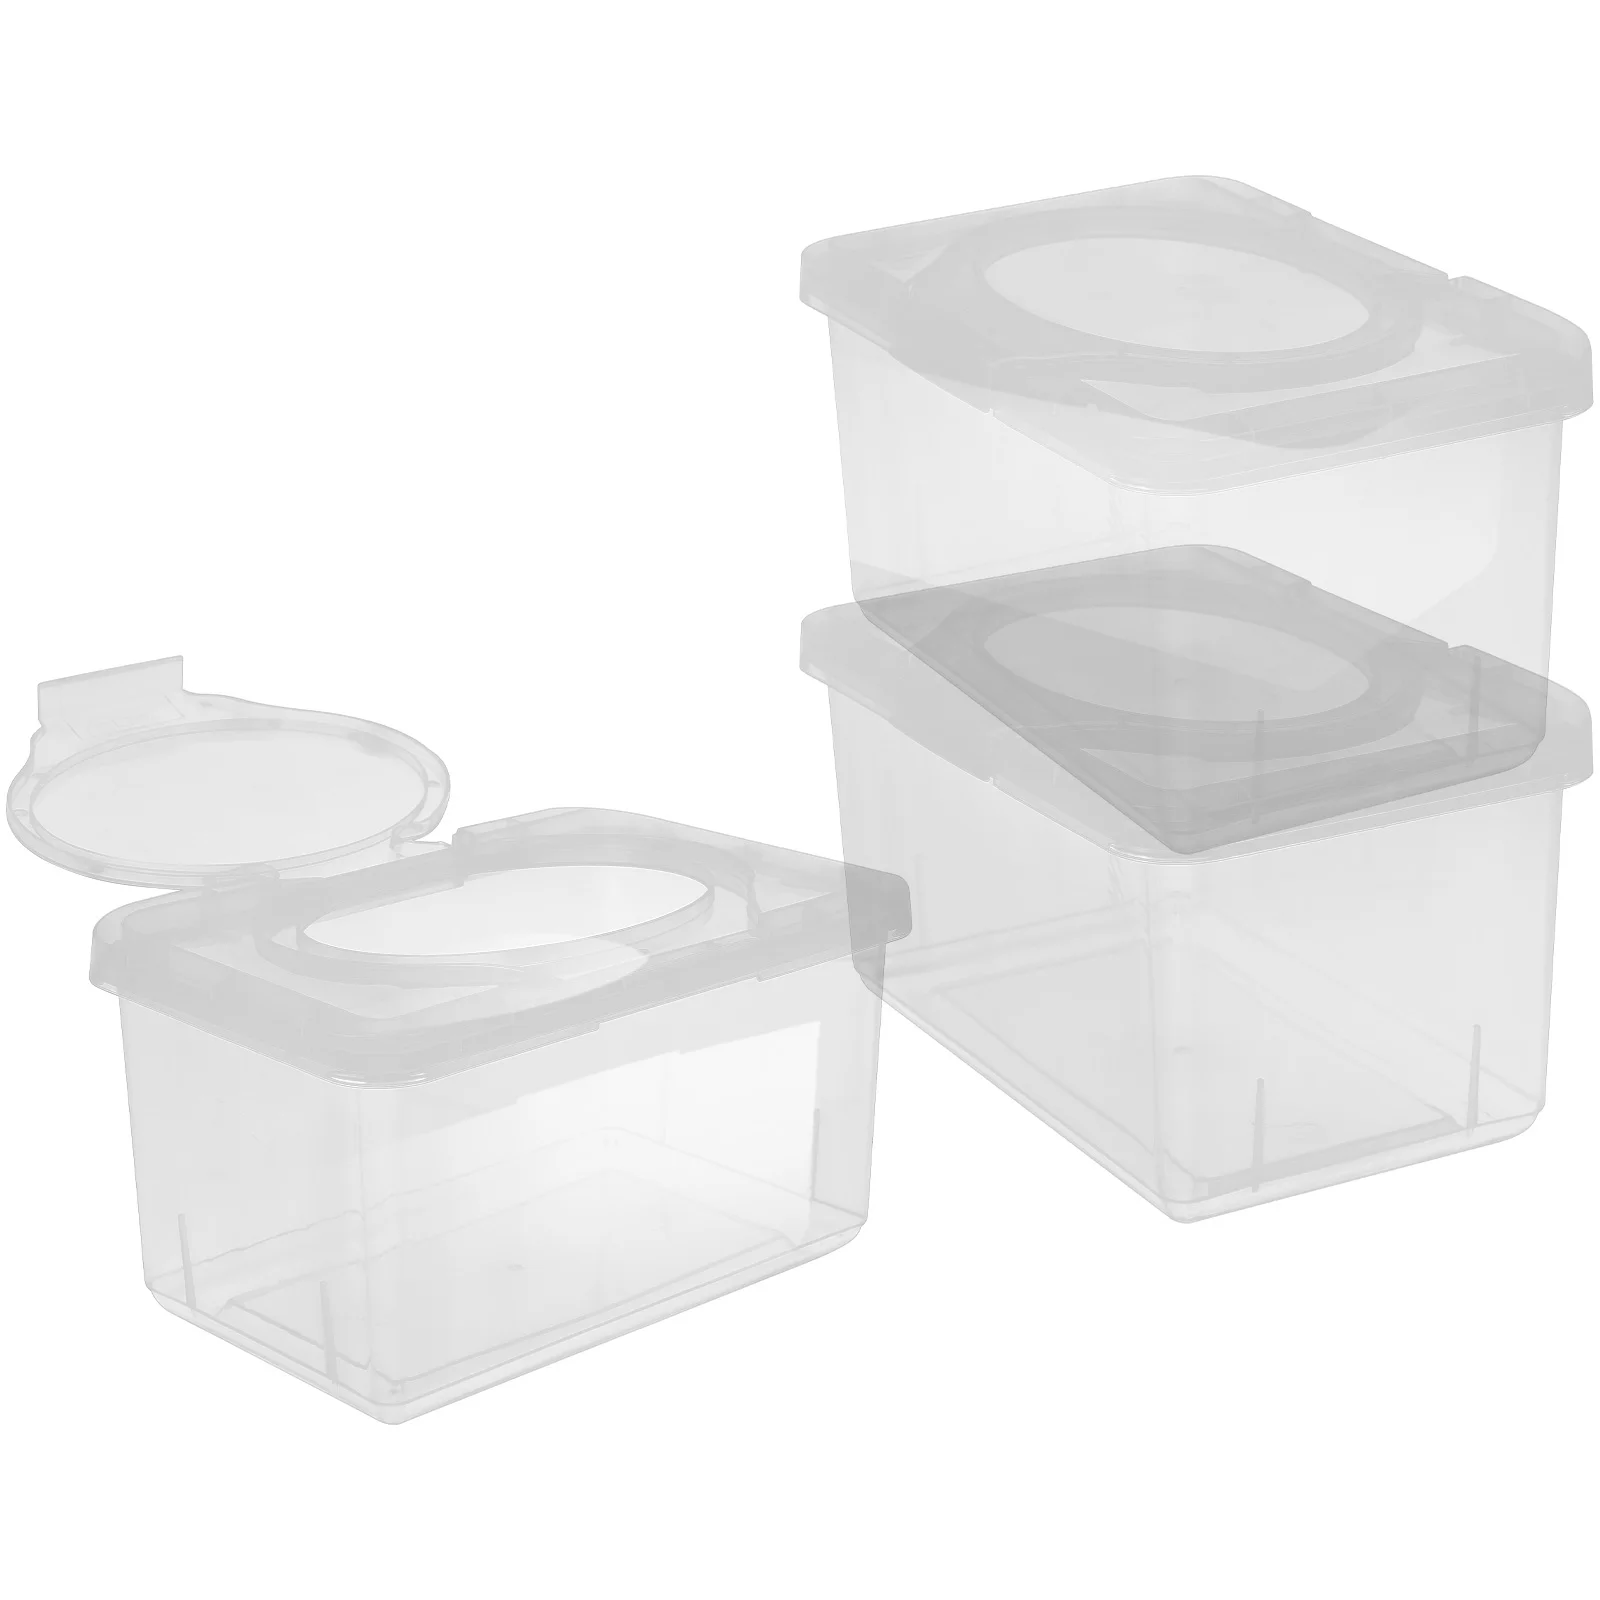 

3Pcs Portable Baby Wipes Dispensers Wet Tissue Containers Wet Wipes Storage Boxes